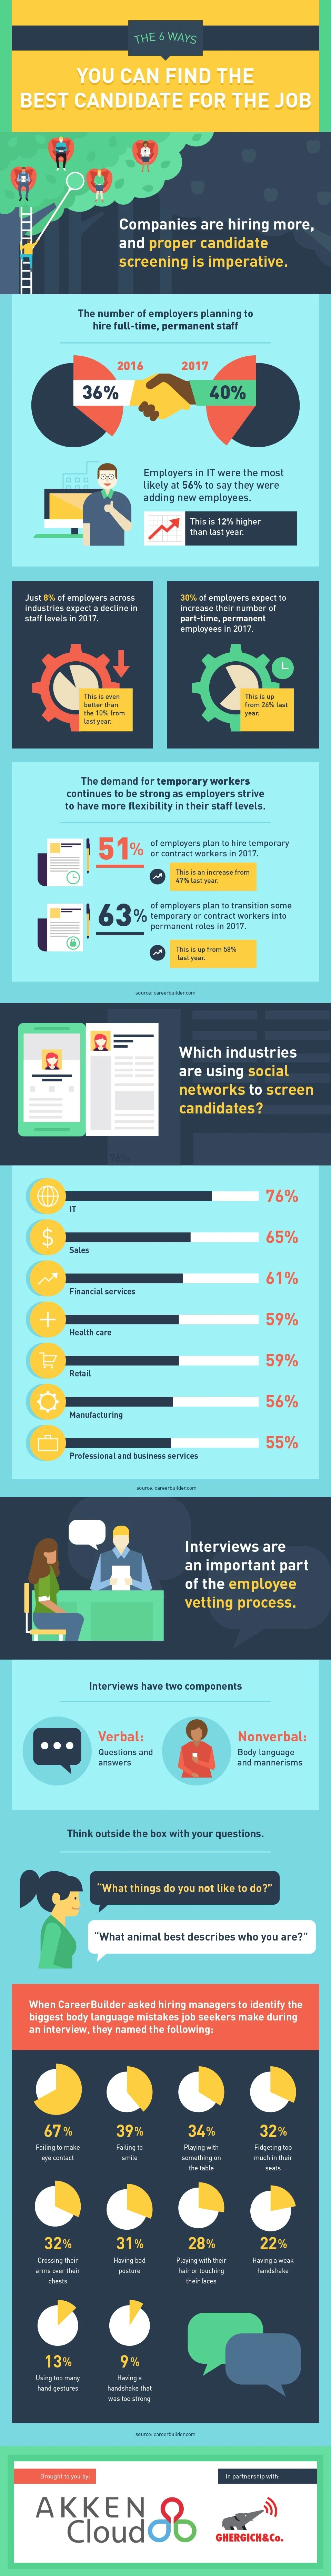 The 6 Ways You Can Find the Best Candidate for the Job - #infographic